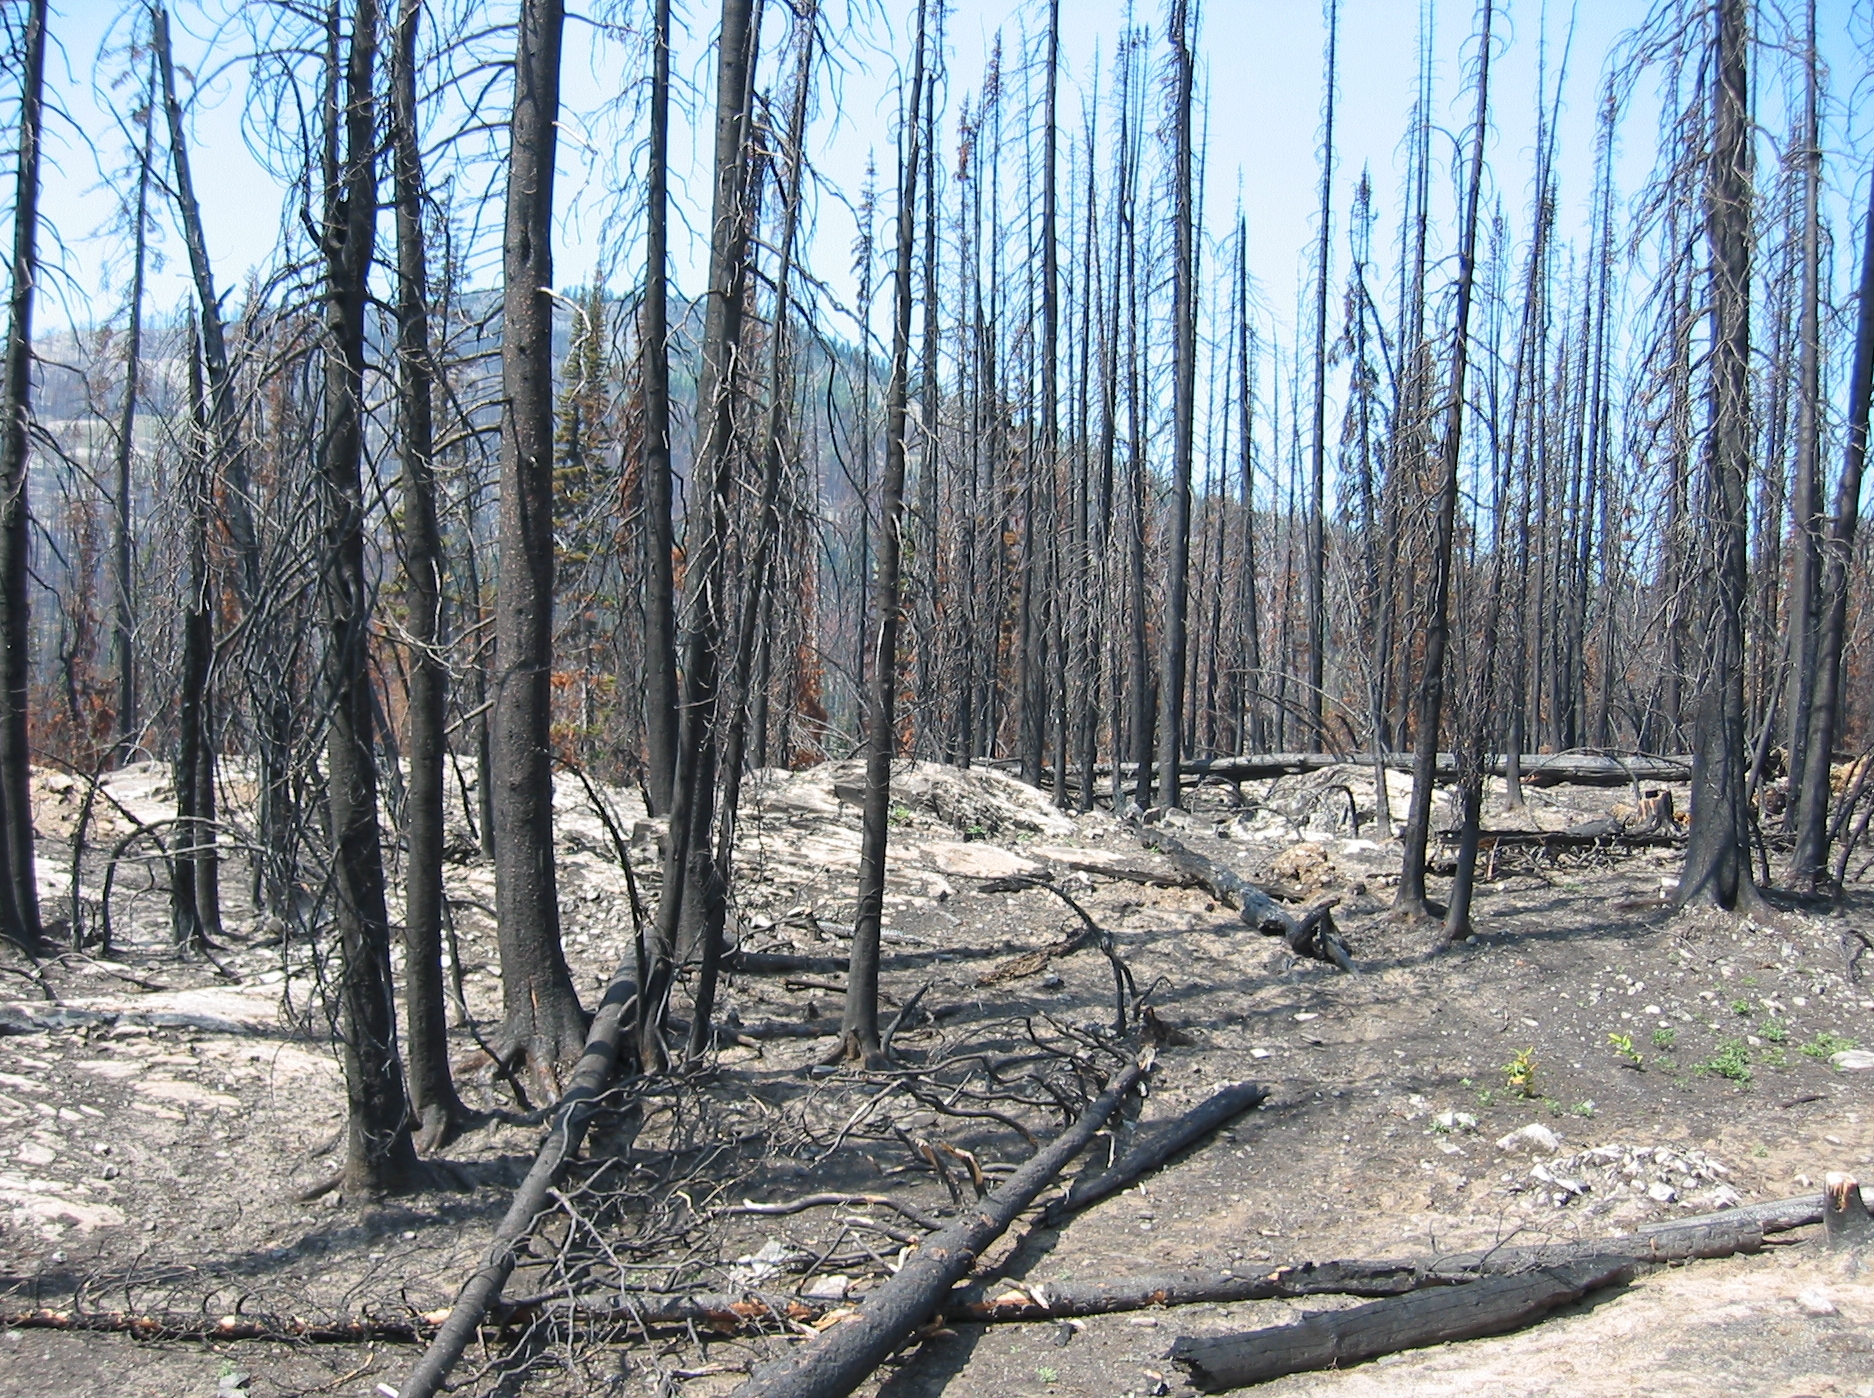 Aftermath of forest fire